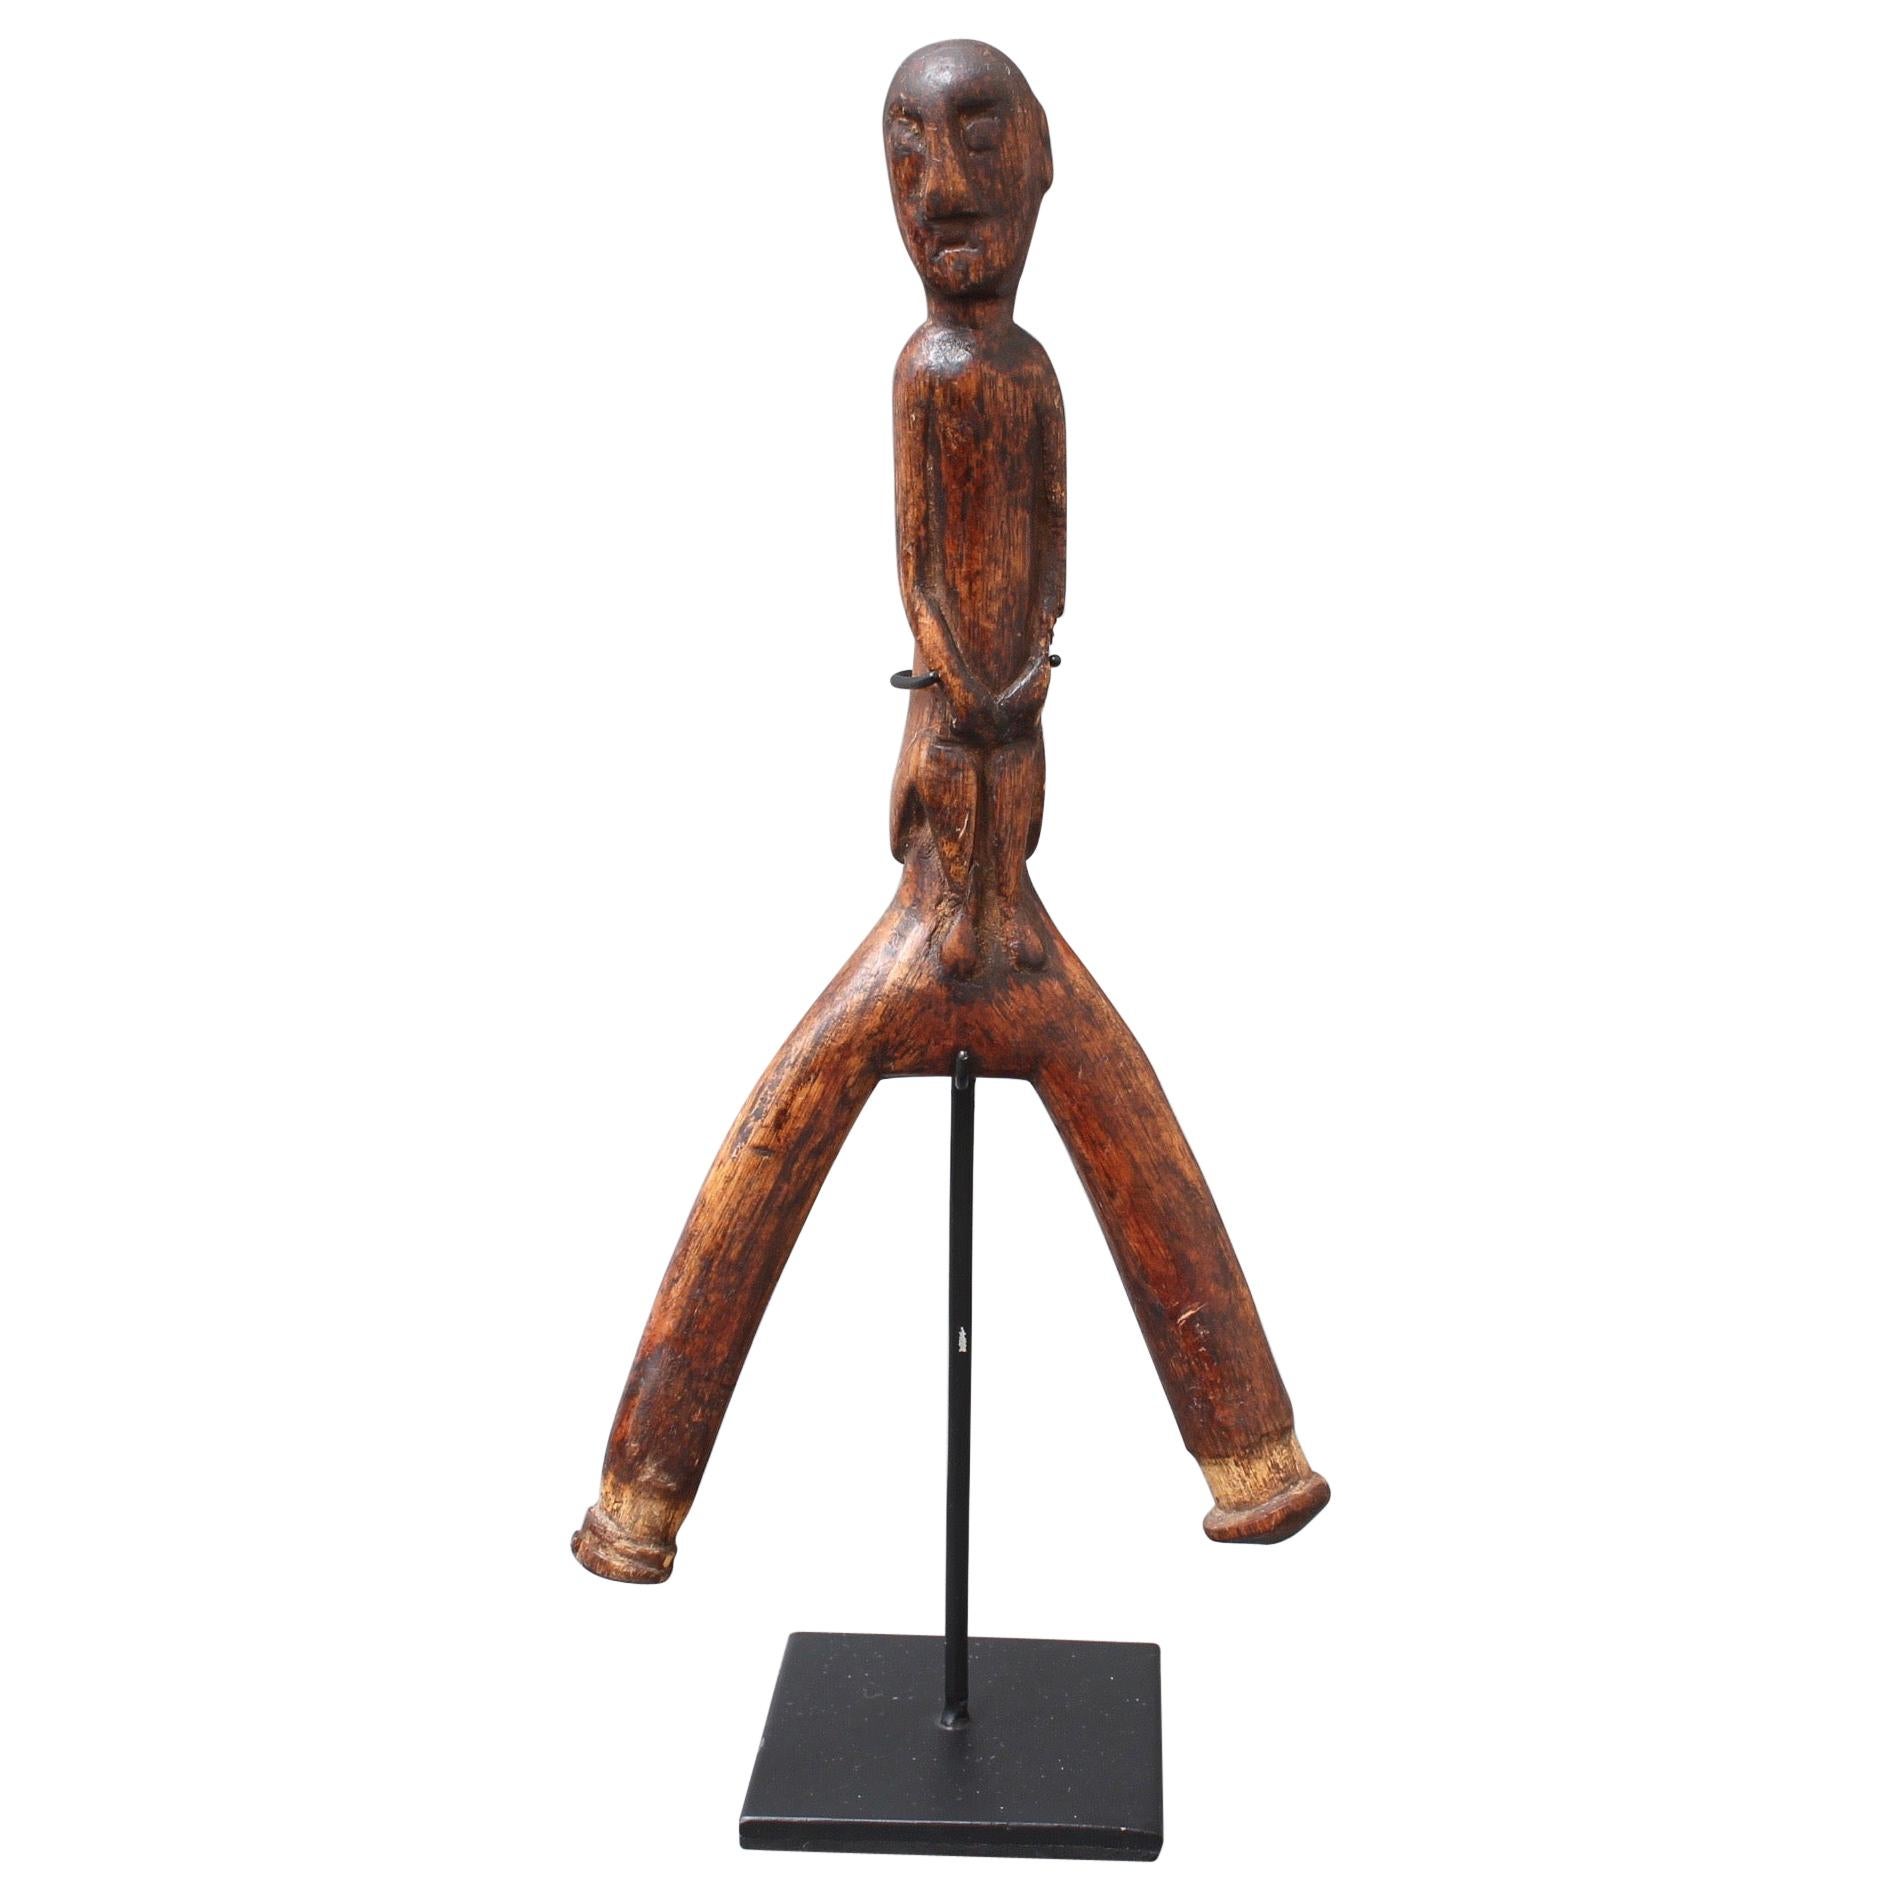 Carved Wooden Slingshot Figure from Timor Island, Indonesia, circa 1970s